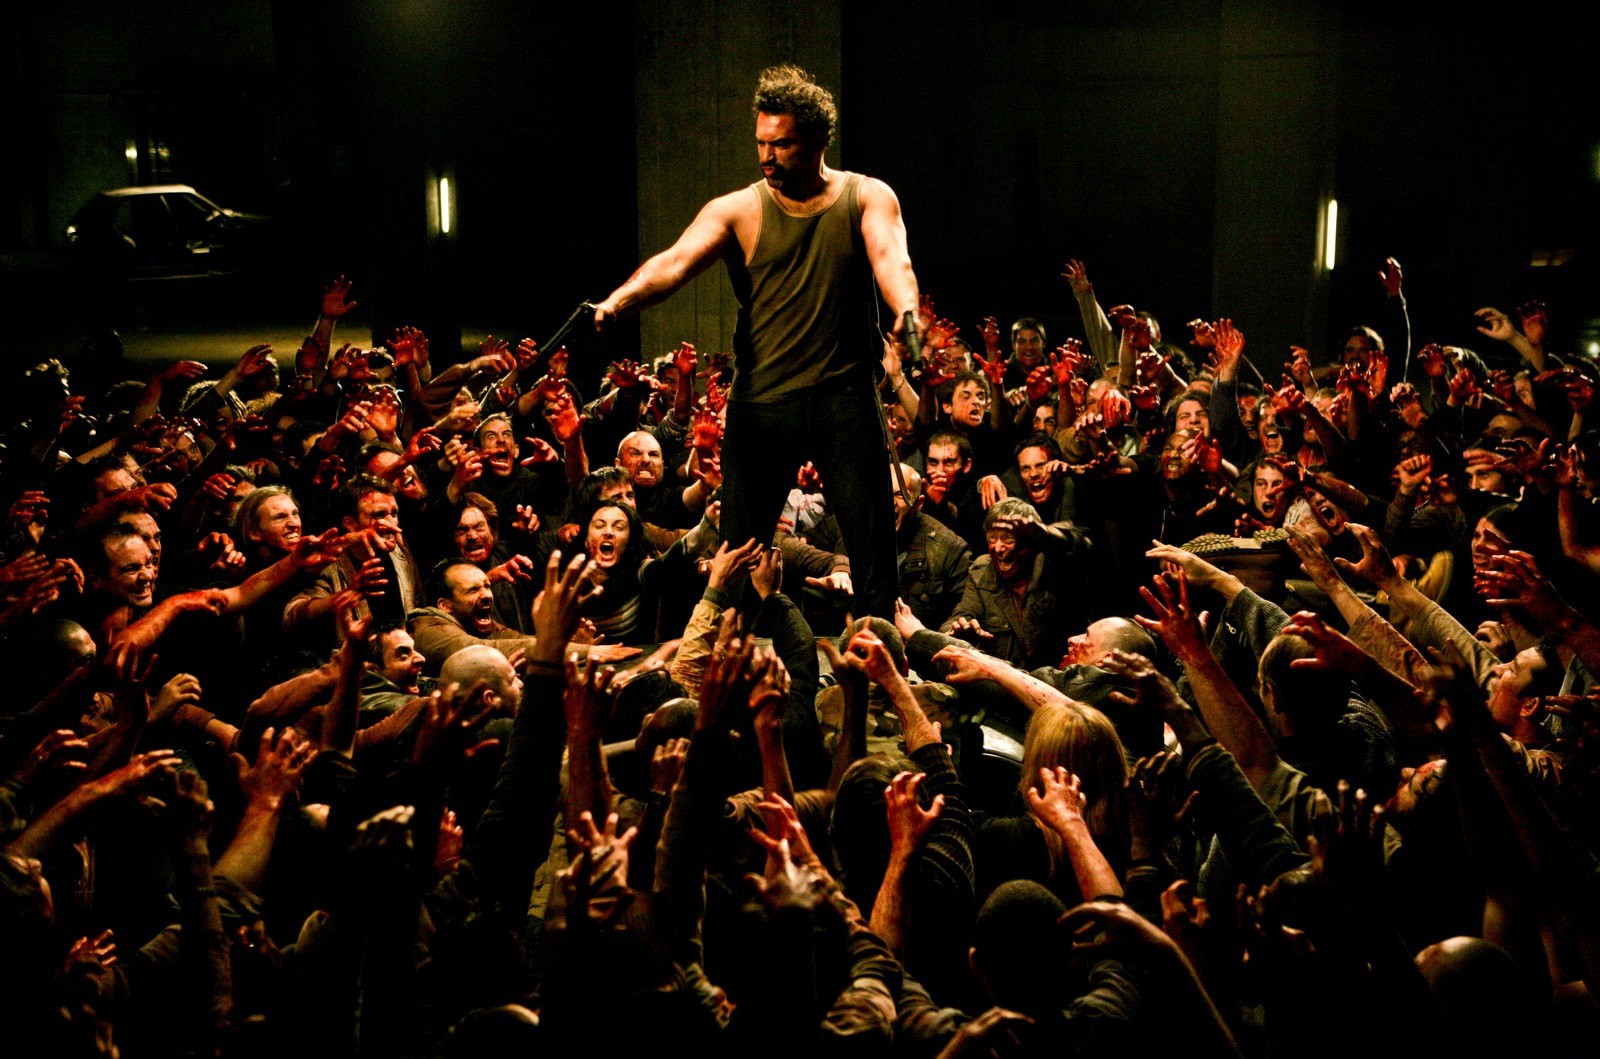 Jean-Pierre Martins surrounded by a horde of zombies in a parking garage in The Horde (2009)